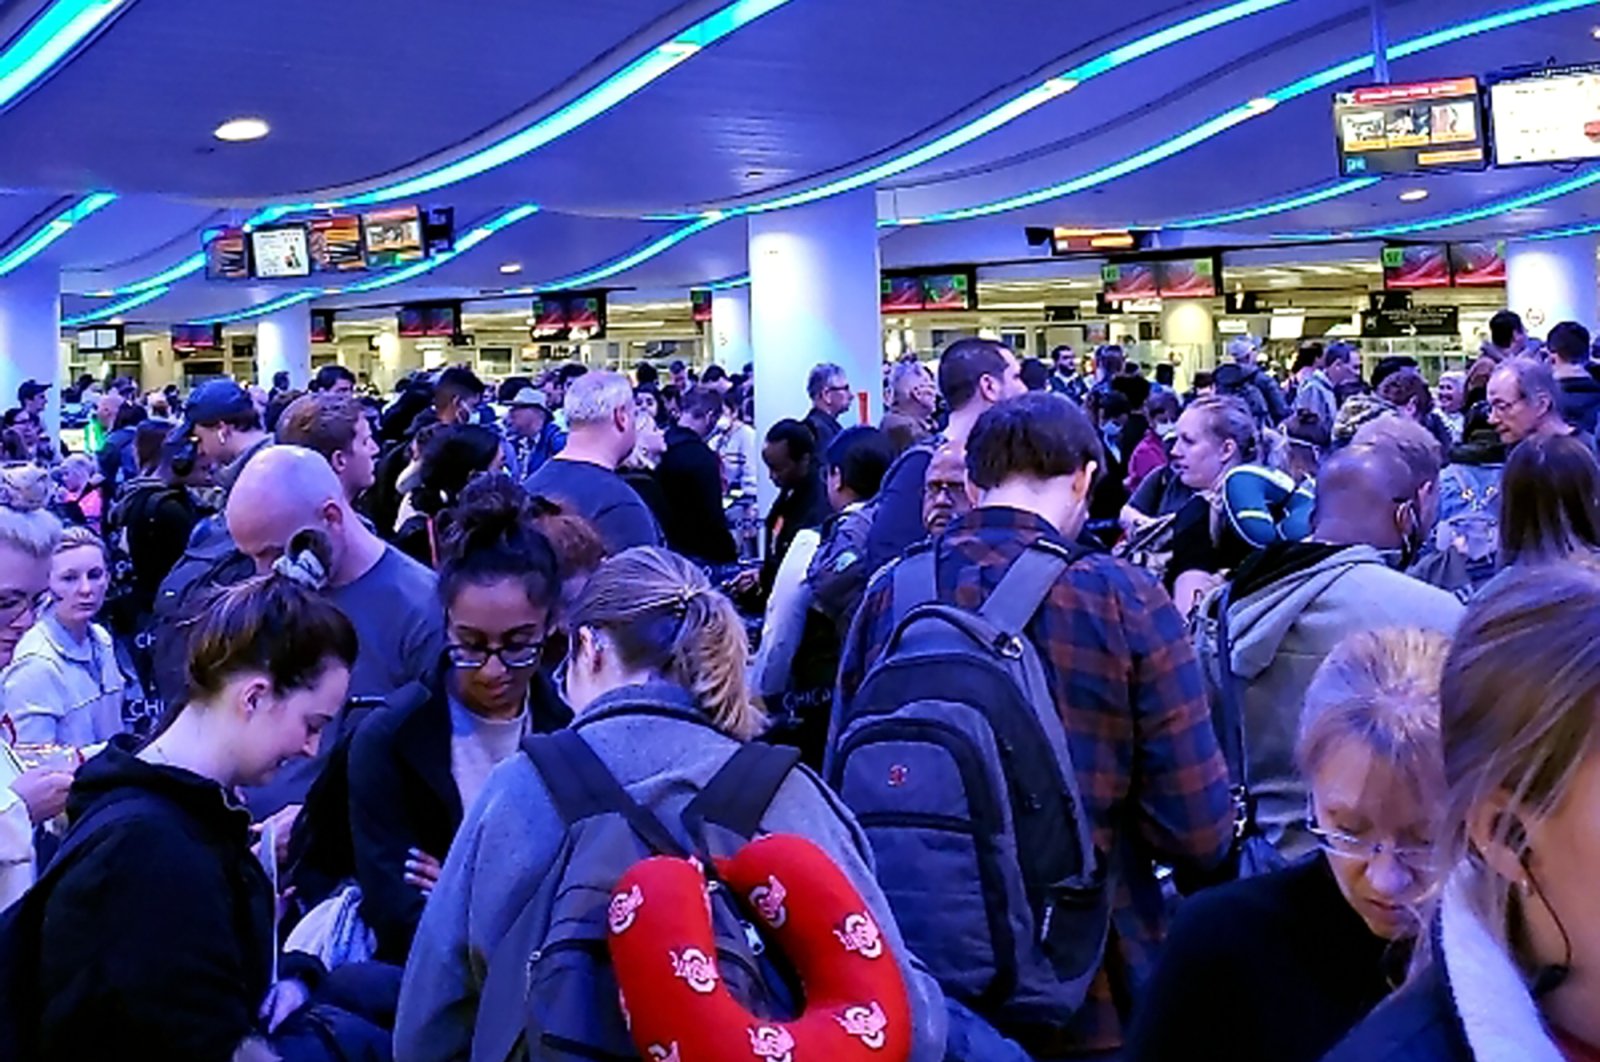 In this Saturday, March 14, 2020 photo provided by Elizabeth Pulvermacher, travelers returning from Madrid wait in a coronavirus screening line at Chicago's O'Hare International Airport. (Elizabeth Pulvermacher via AP)